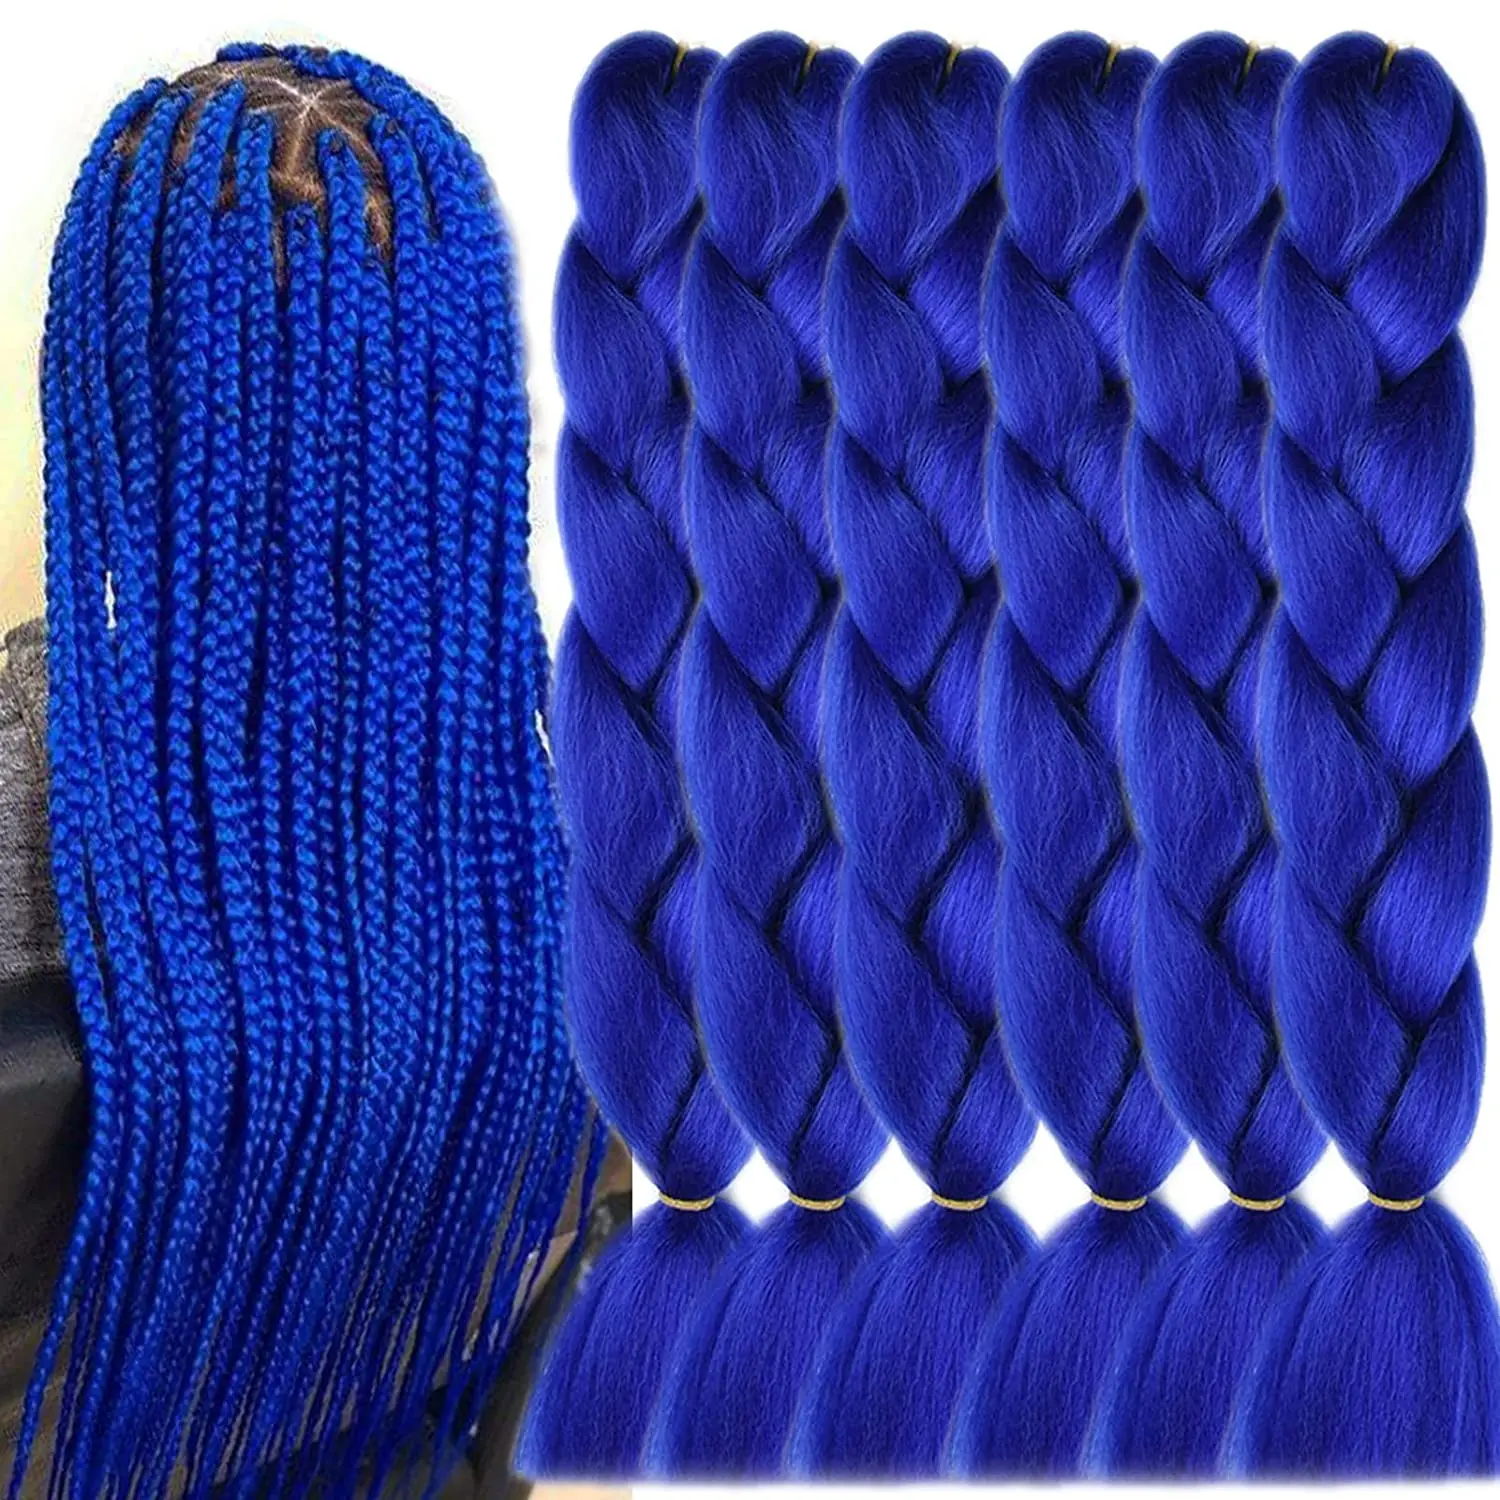 

Ombre Color Synthetic Hair Braids Pre Stretched Wholesale Jumbo Braiding Hair Extensions Blue Pink Purple 100g/pcs 24Inch